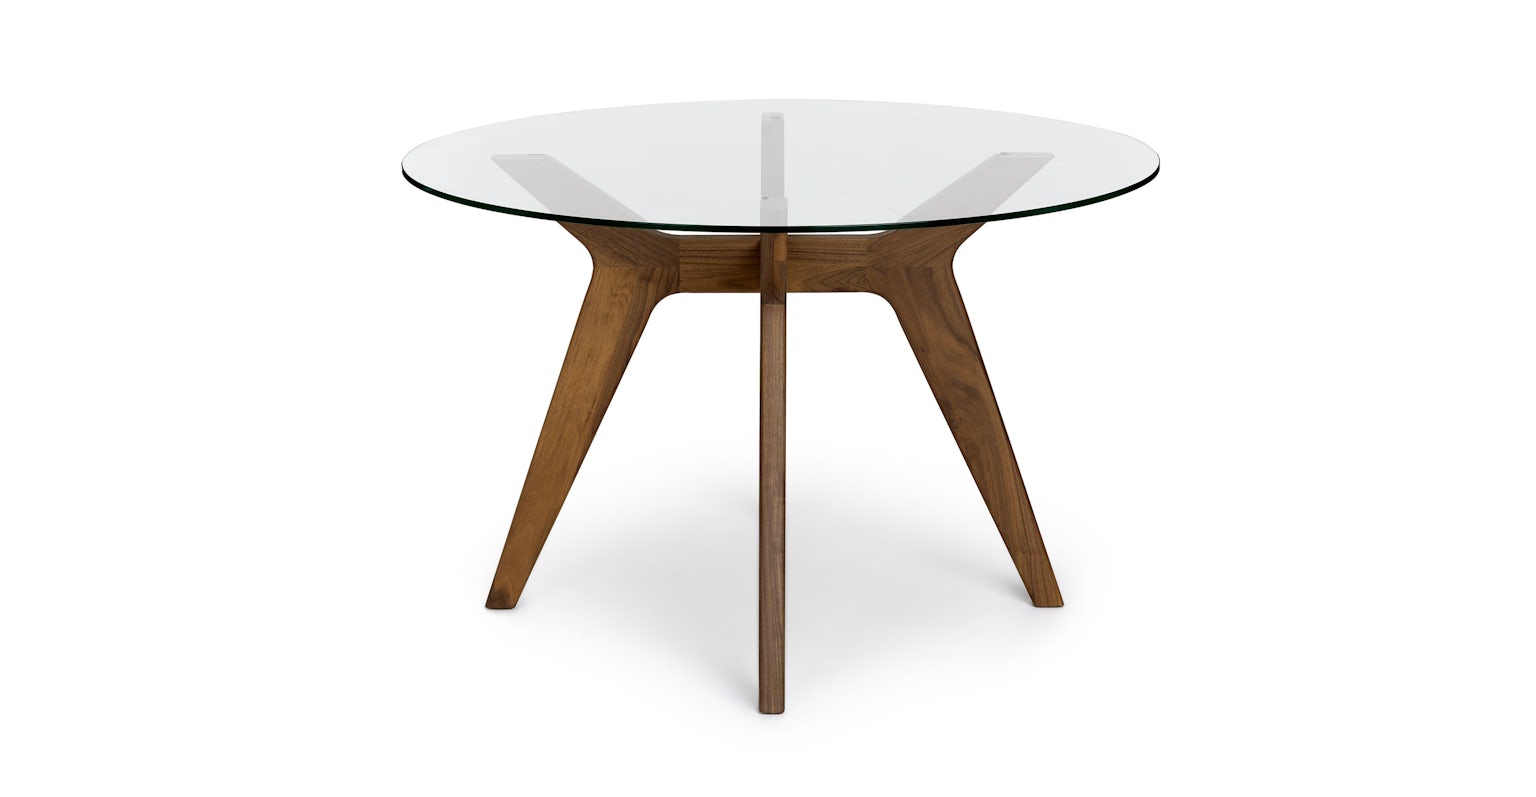 Tafulo Walnut Wood & Glass Round Dining Table | Article